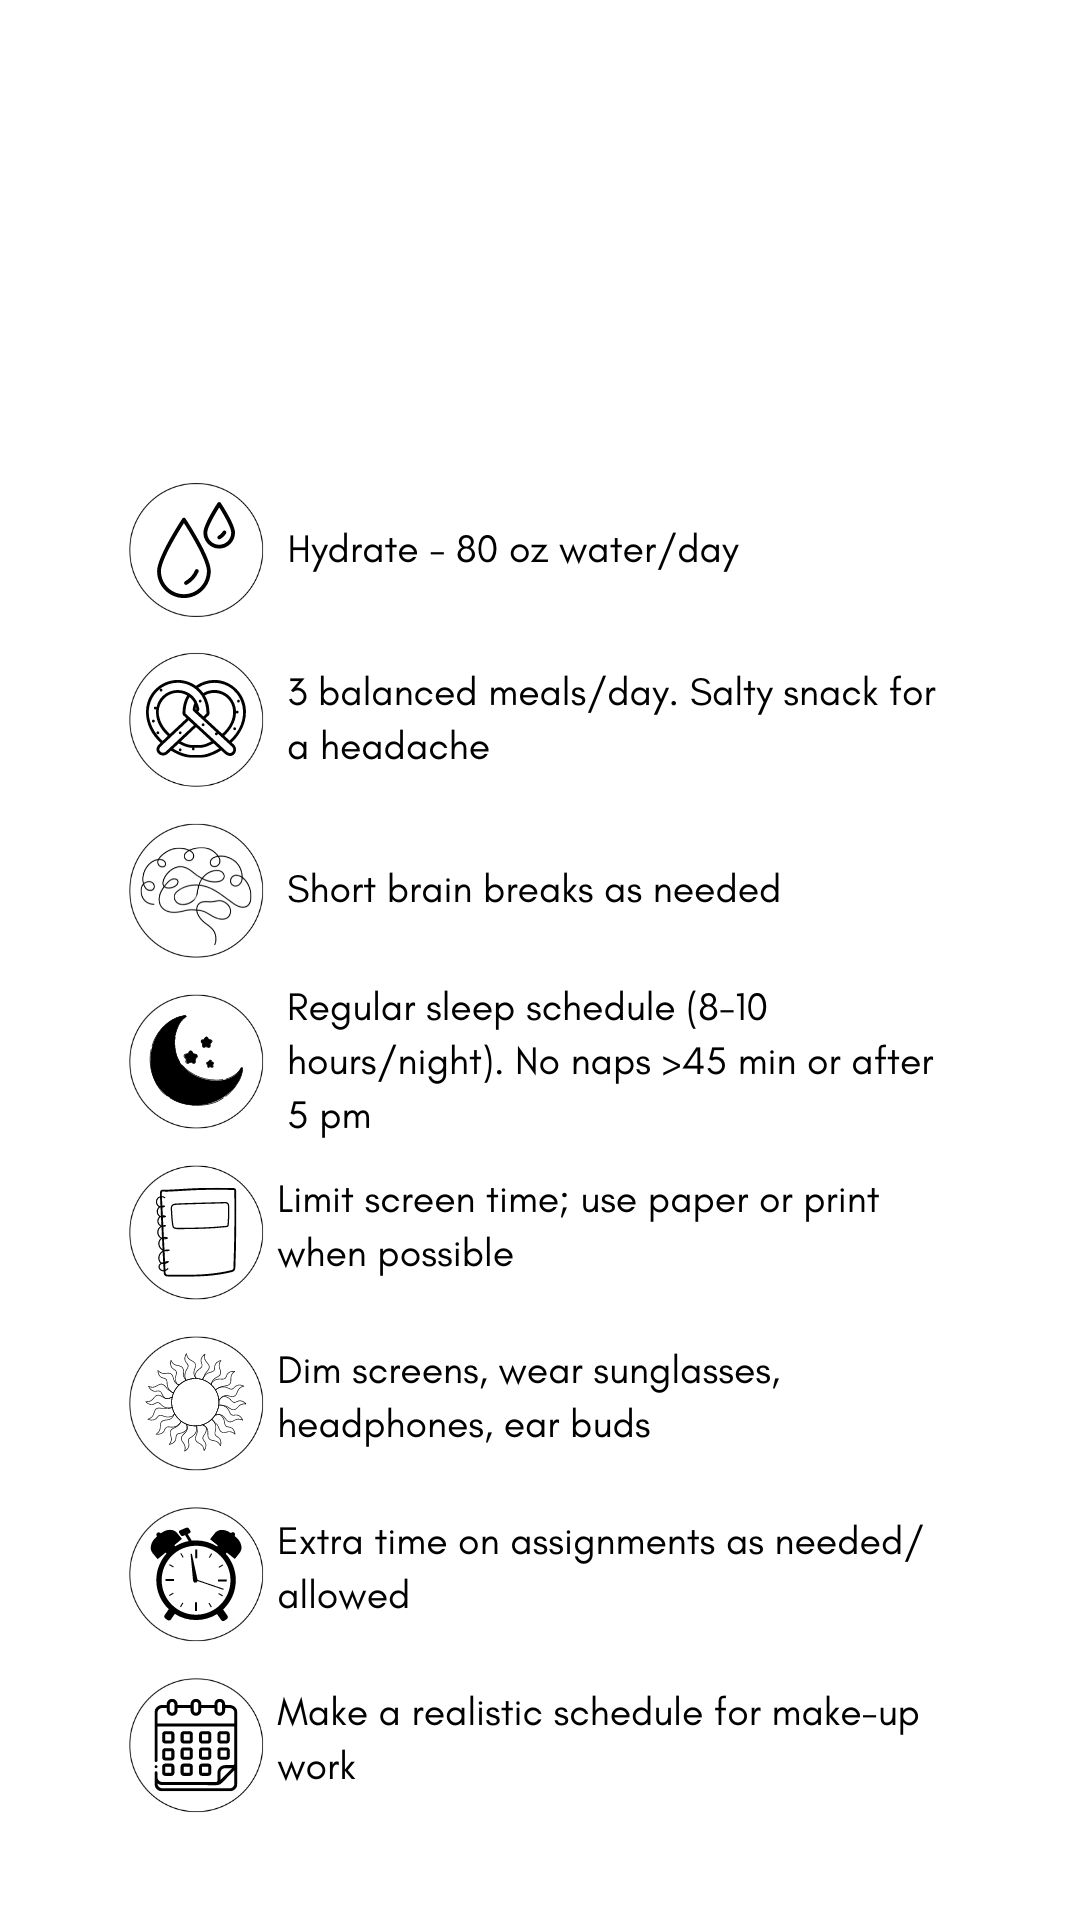 Concussion treatment tips in black text and graphics against a white backdrop. The tips read, hydrate (80 oz. water/day). Eat 3 balanced meals/day, salt snack for headache. Short brain breaks as needed, Sleep time (8-10 hrs/night), no naps > 45 mins. or after 5 pm. Limit screens, use paper/print. when possible .Dim screens. wear sunglasses, headphones, earbuds. Allow extra time on assignments as allowed. Pace yourself. Make a realistic schedule for make-up work.